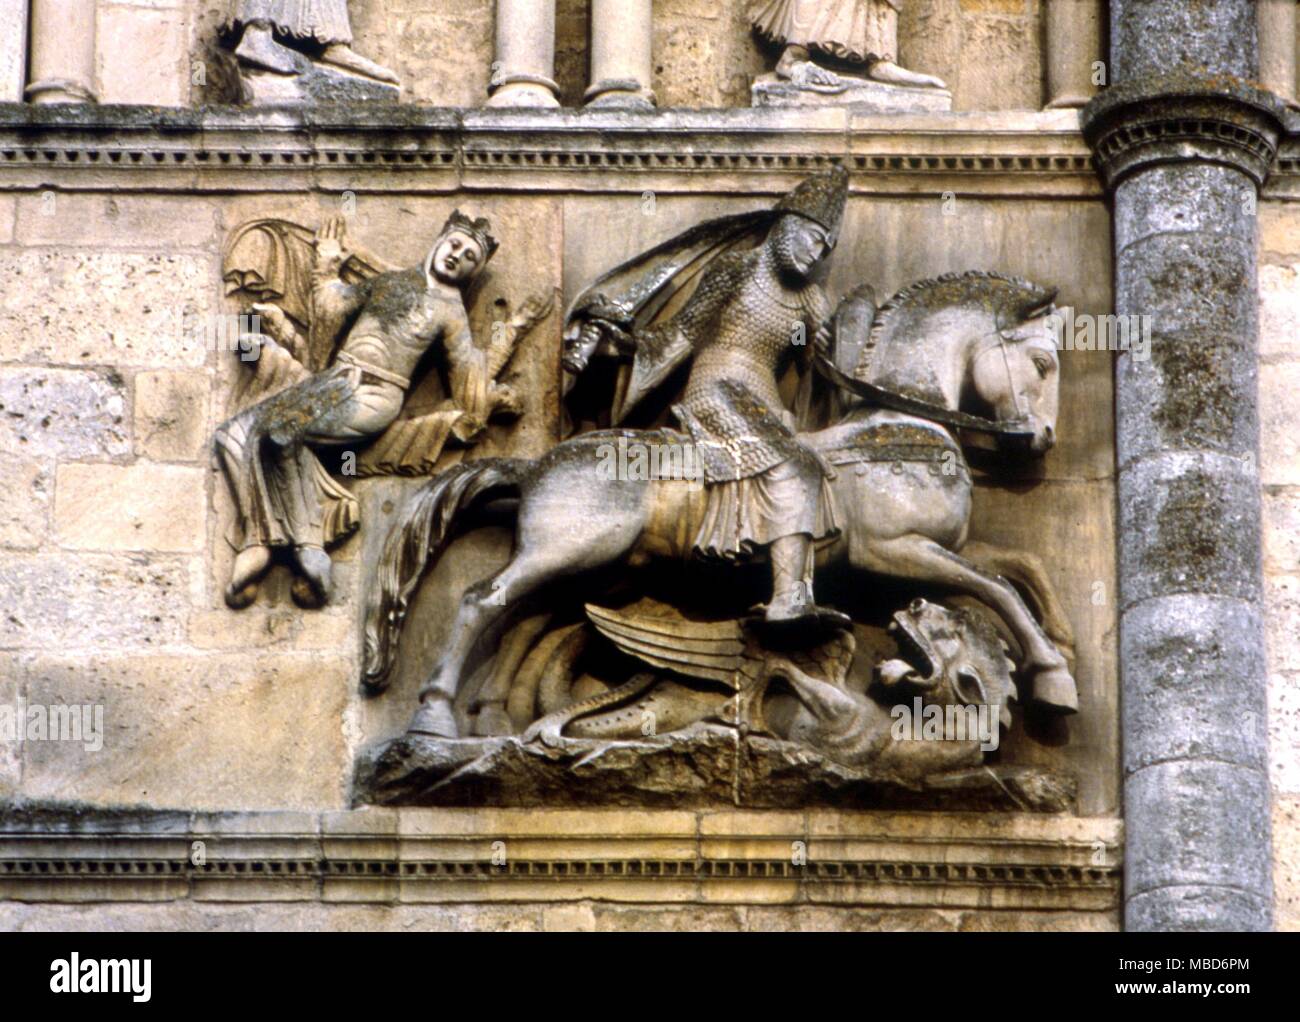 DRAGON - St George and the Dragon - Nineteenth century restoration of an earlier rider (of unknown meaning) in the guise of St George and the Dragon, with the princess in the background. Detail on the facade of Angouleme cathedral. Stock Photo